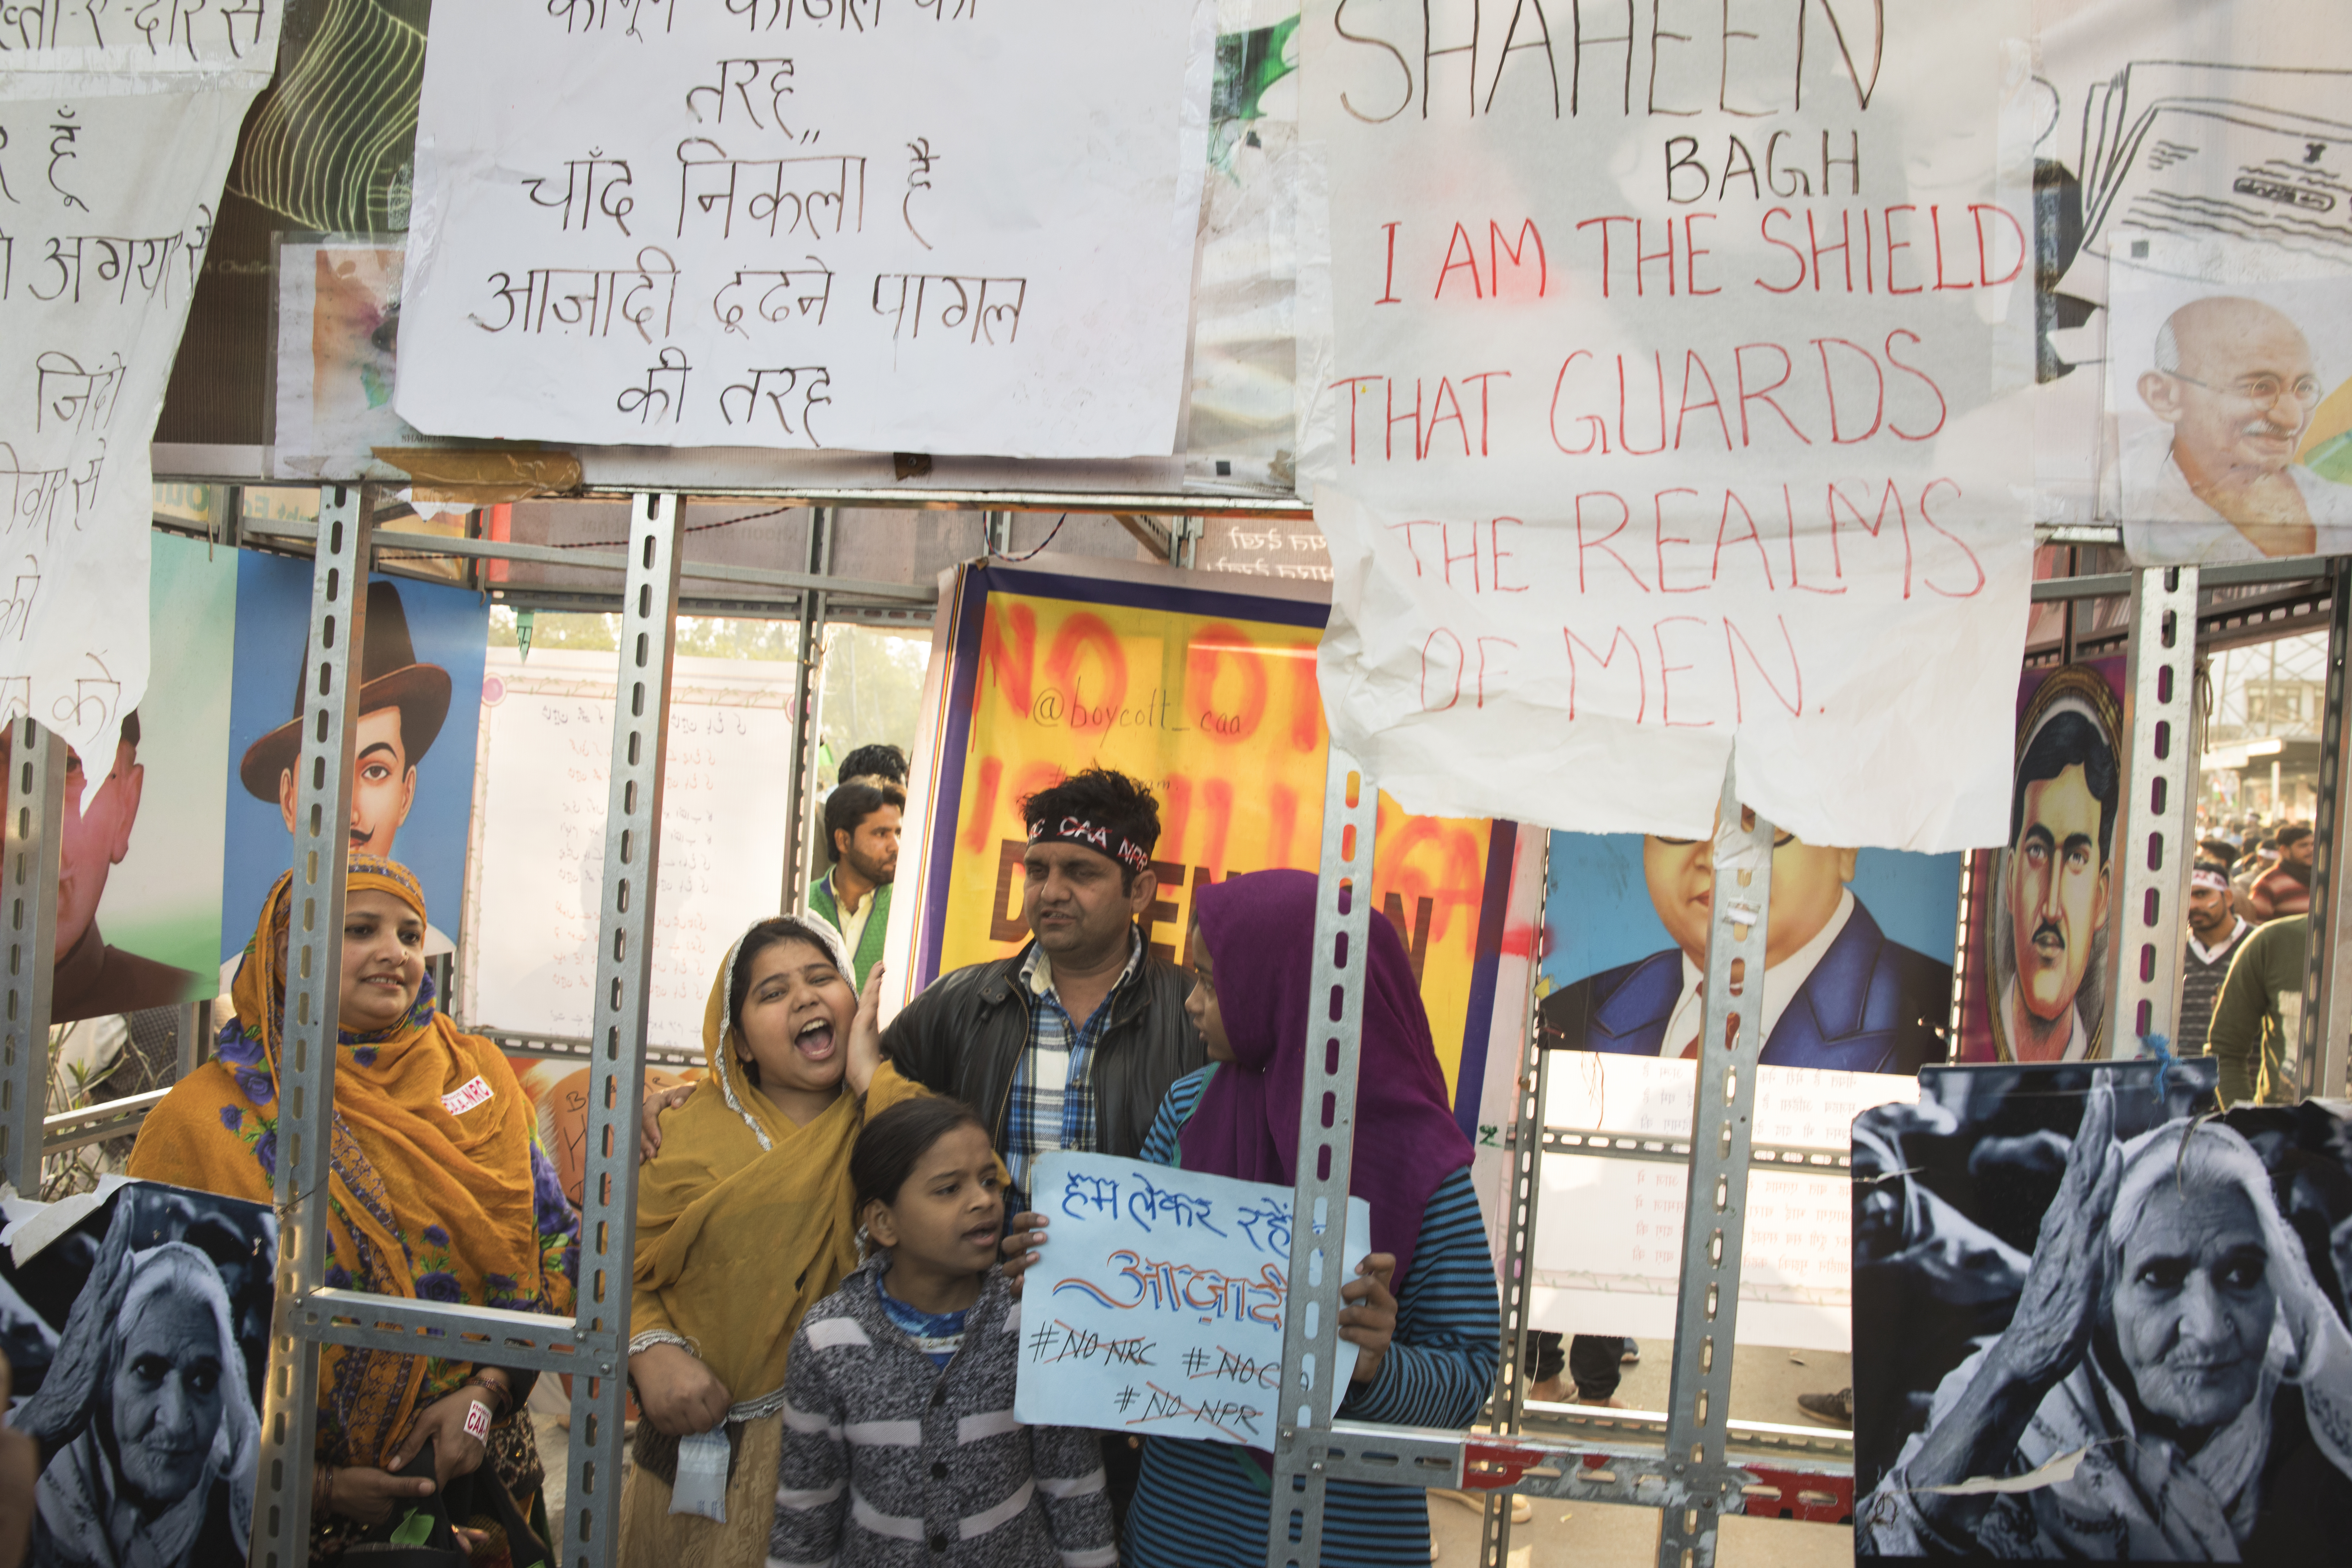 Protestors with signs, Shaheen Bagh, New Delhi, December 2019. 